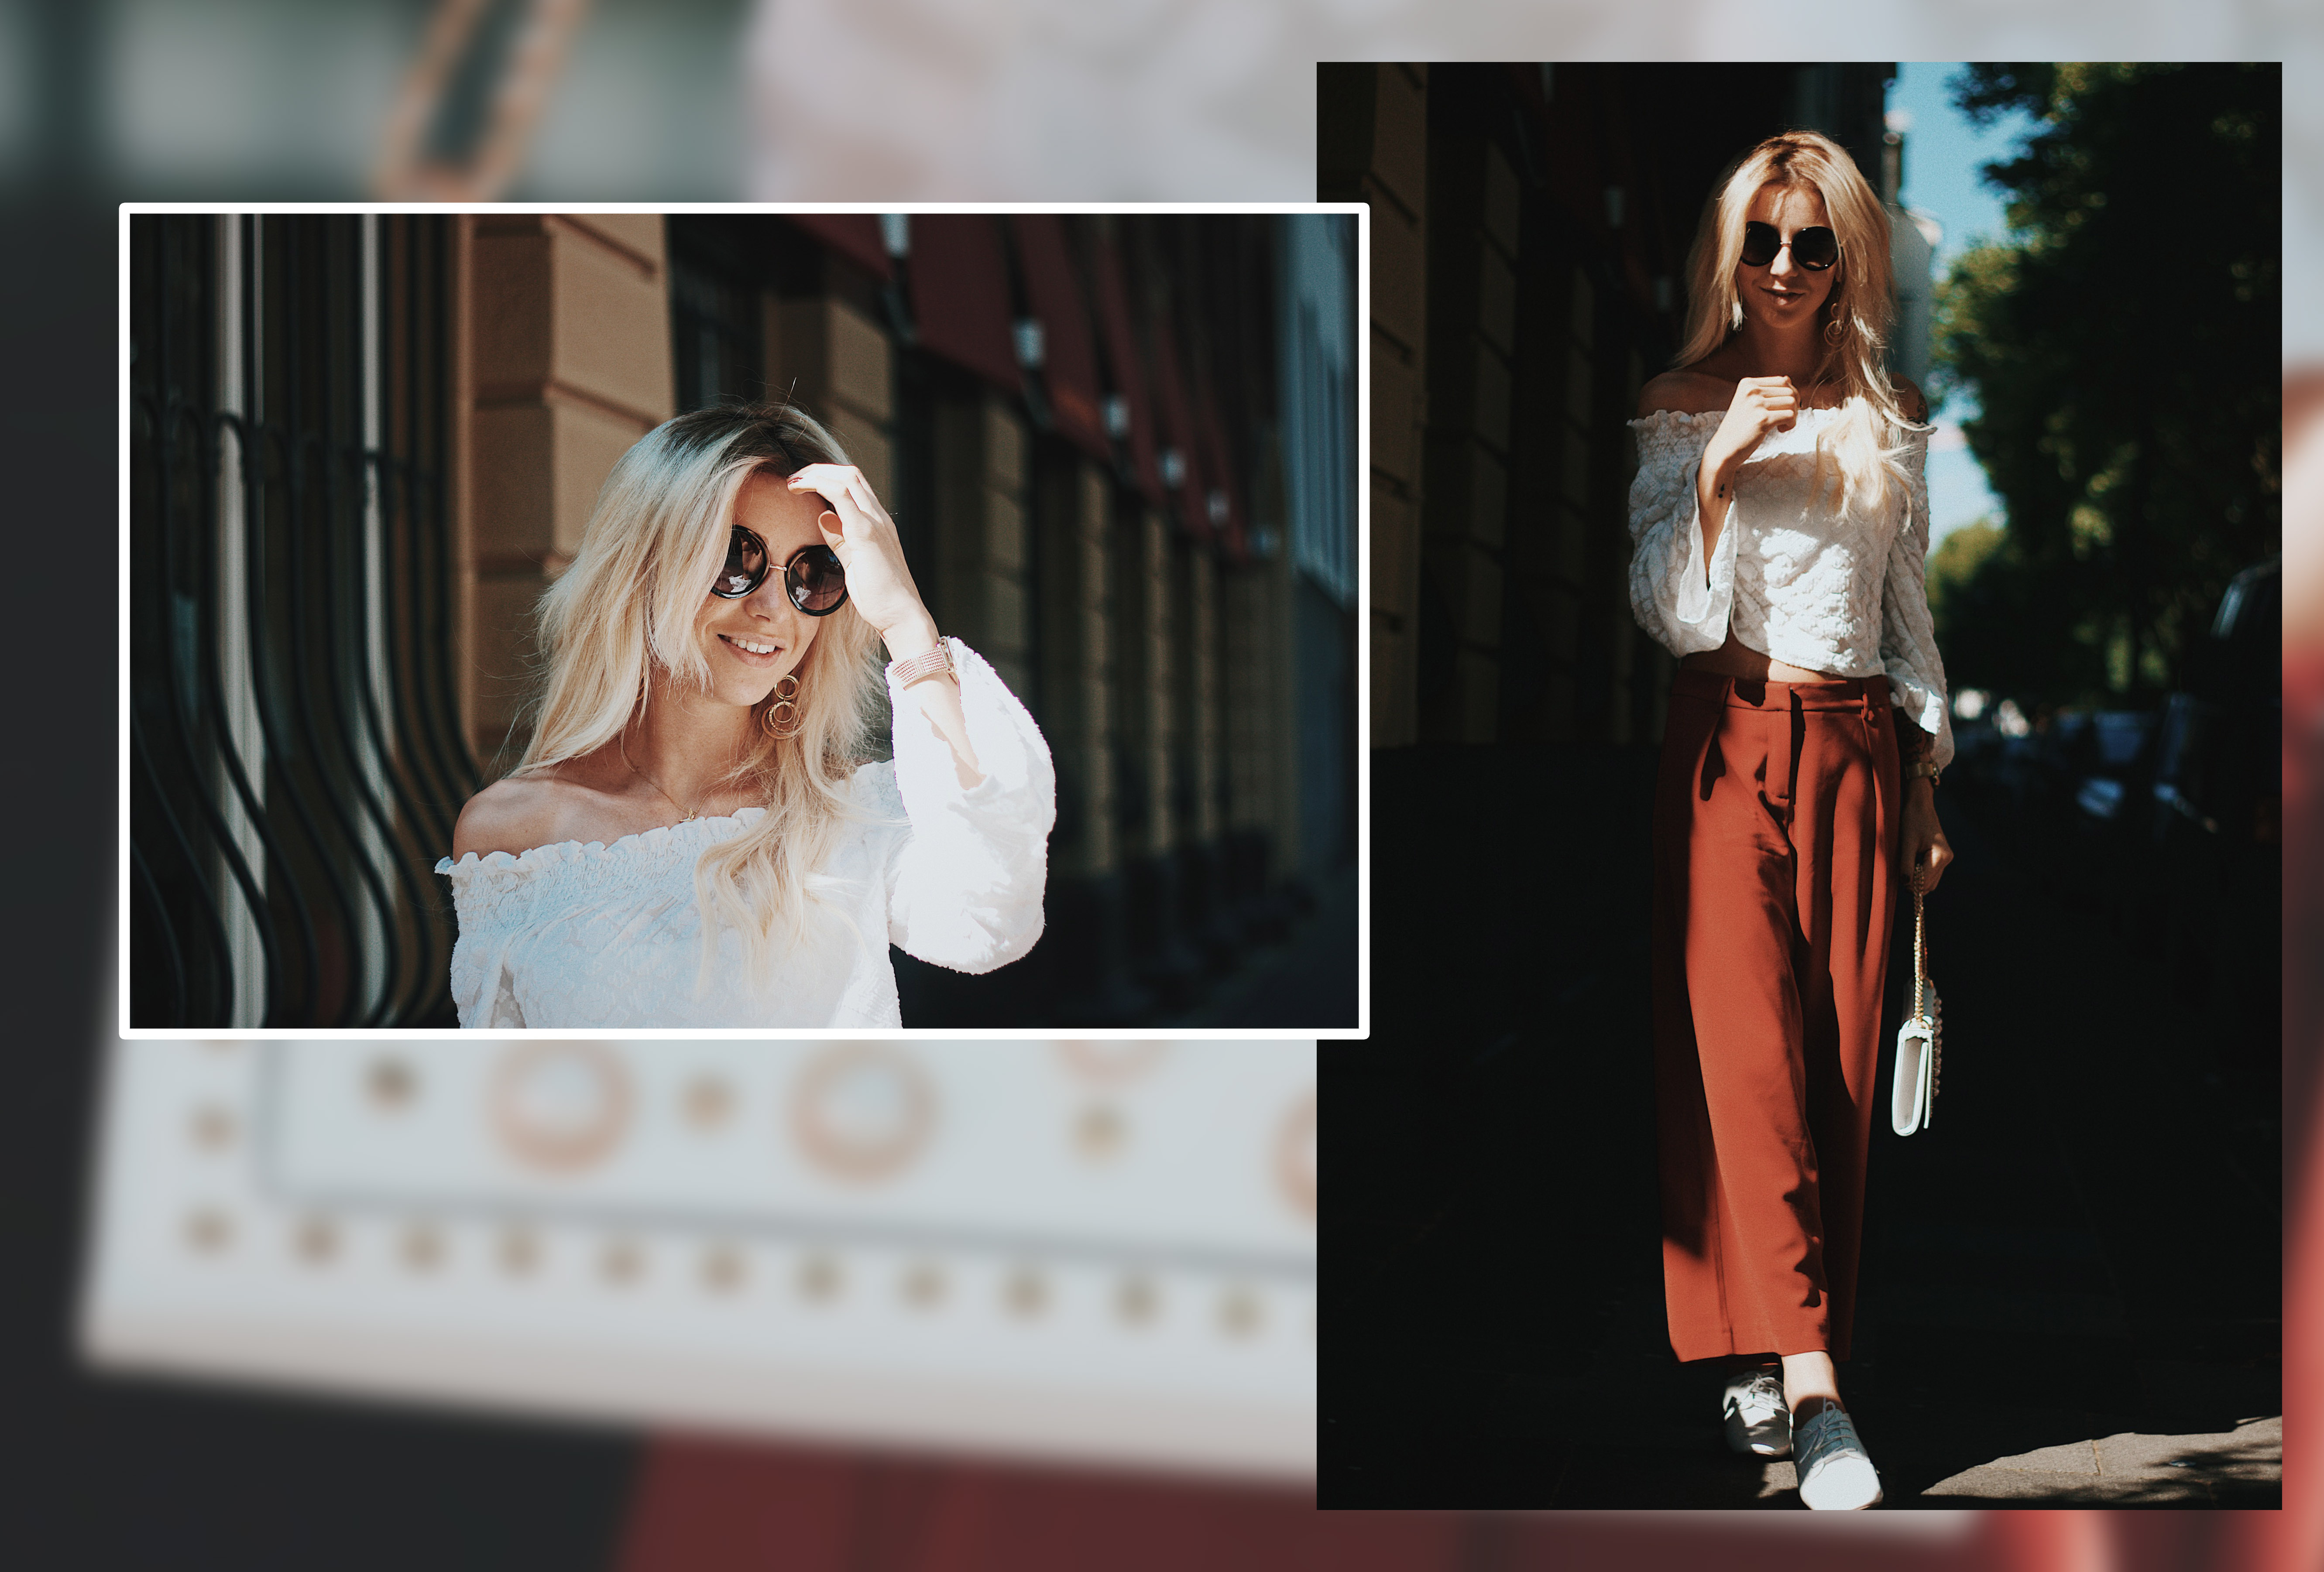 minamia-outfit-vogue-style-blogger-influencer-ootd-koeln